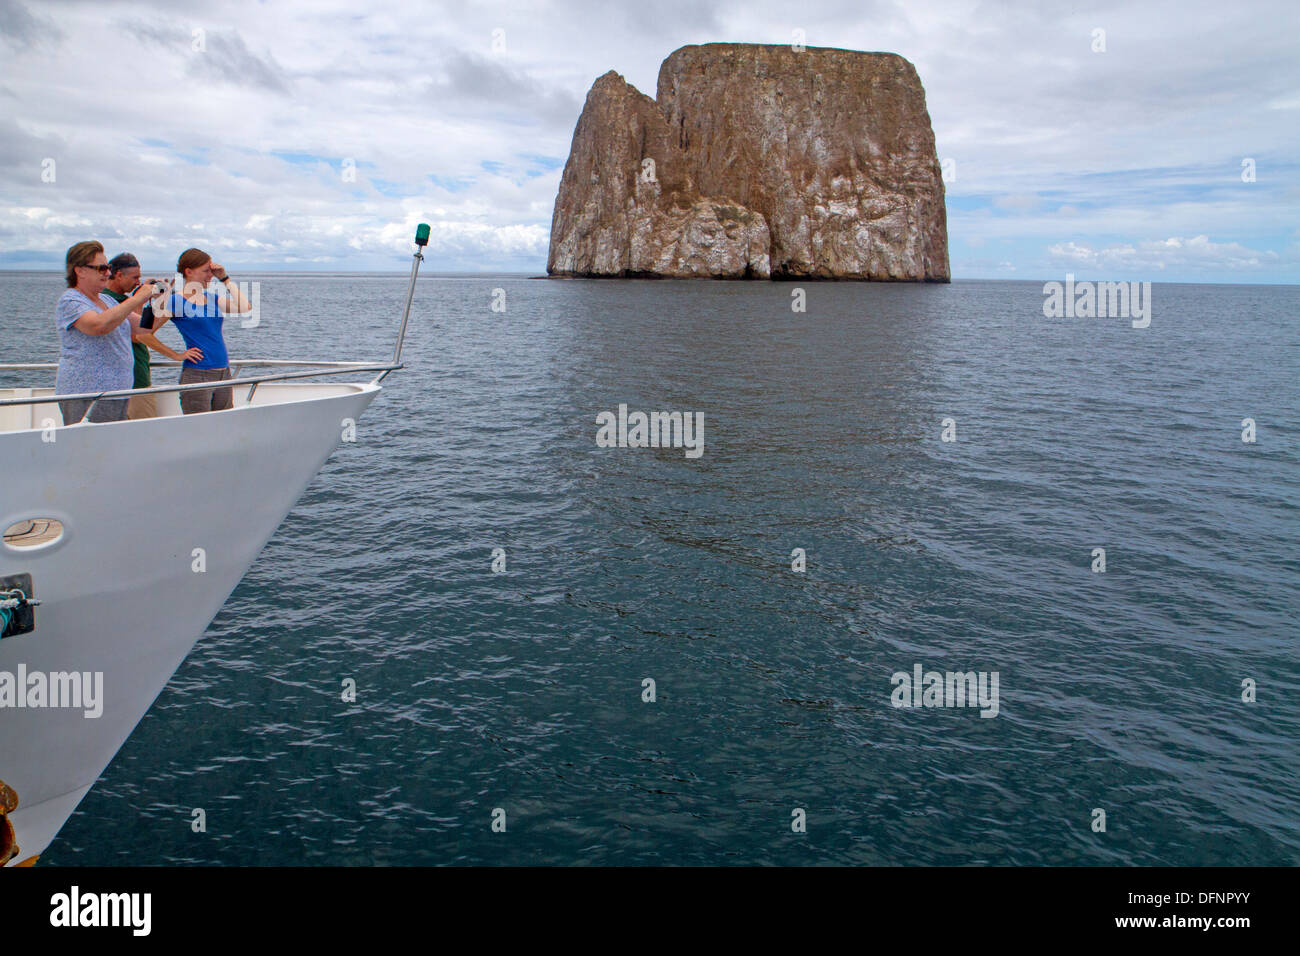 Tourist boat and Kicker Rock in the Galapagos Islands Stock Photo